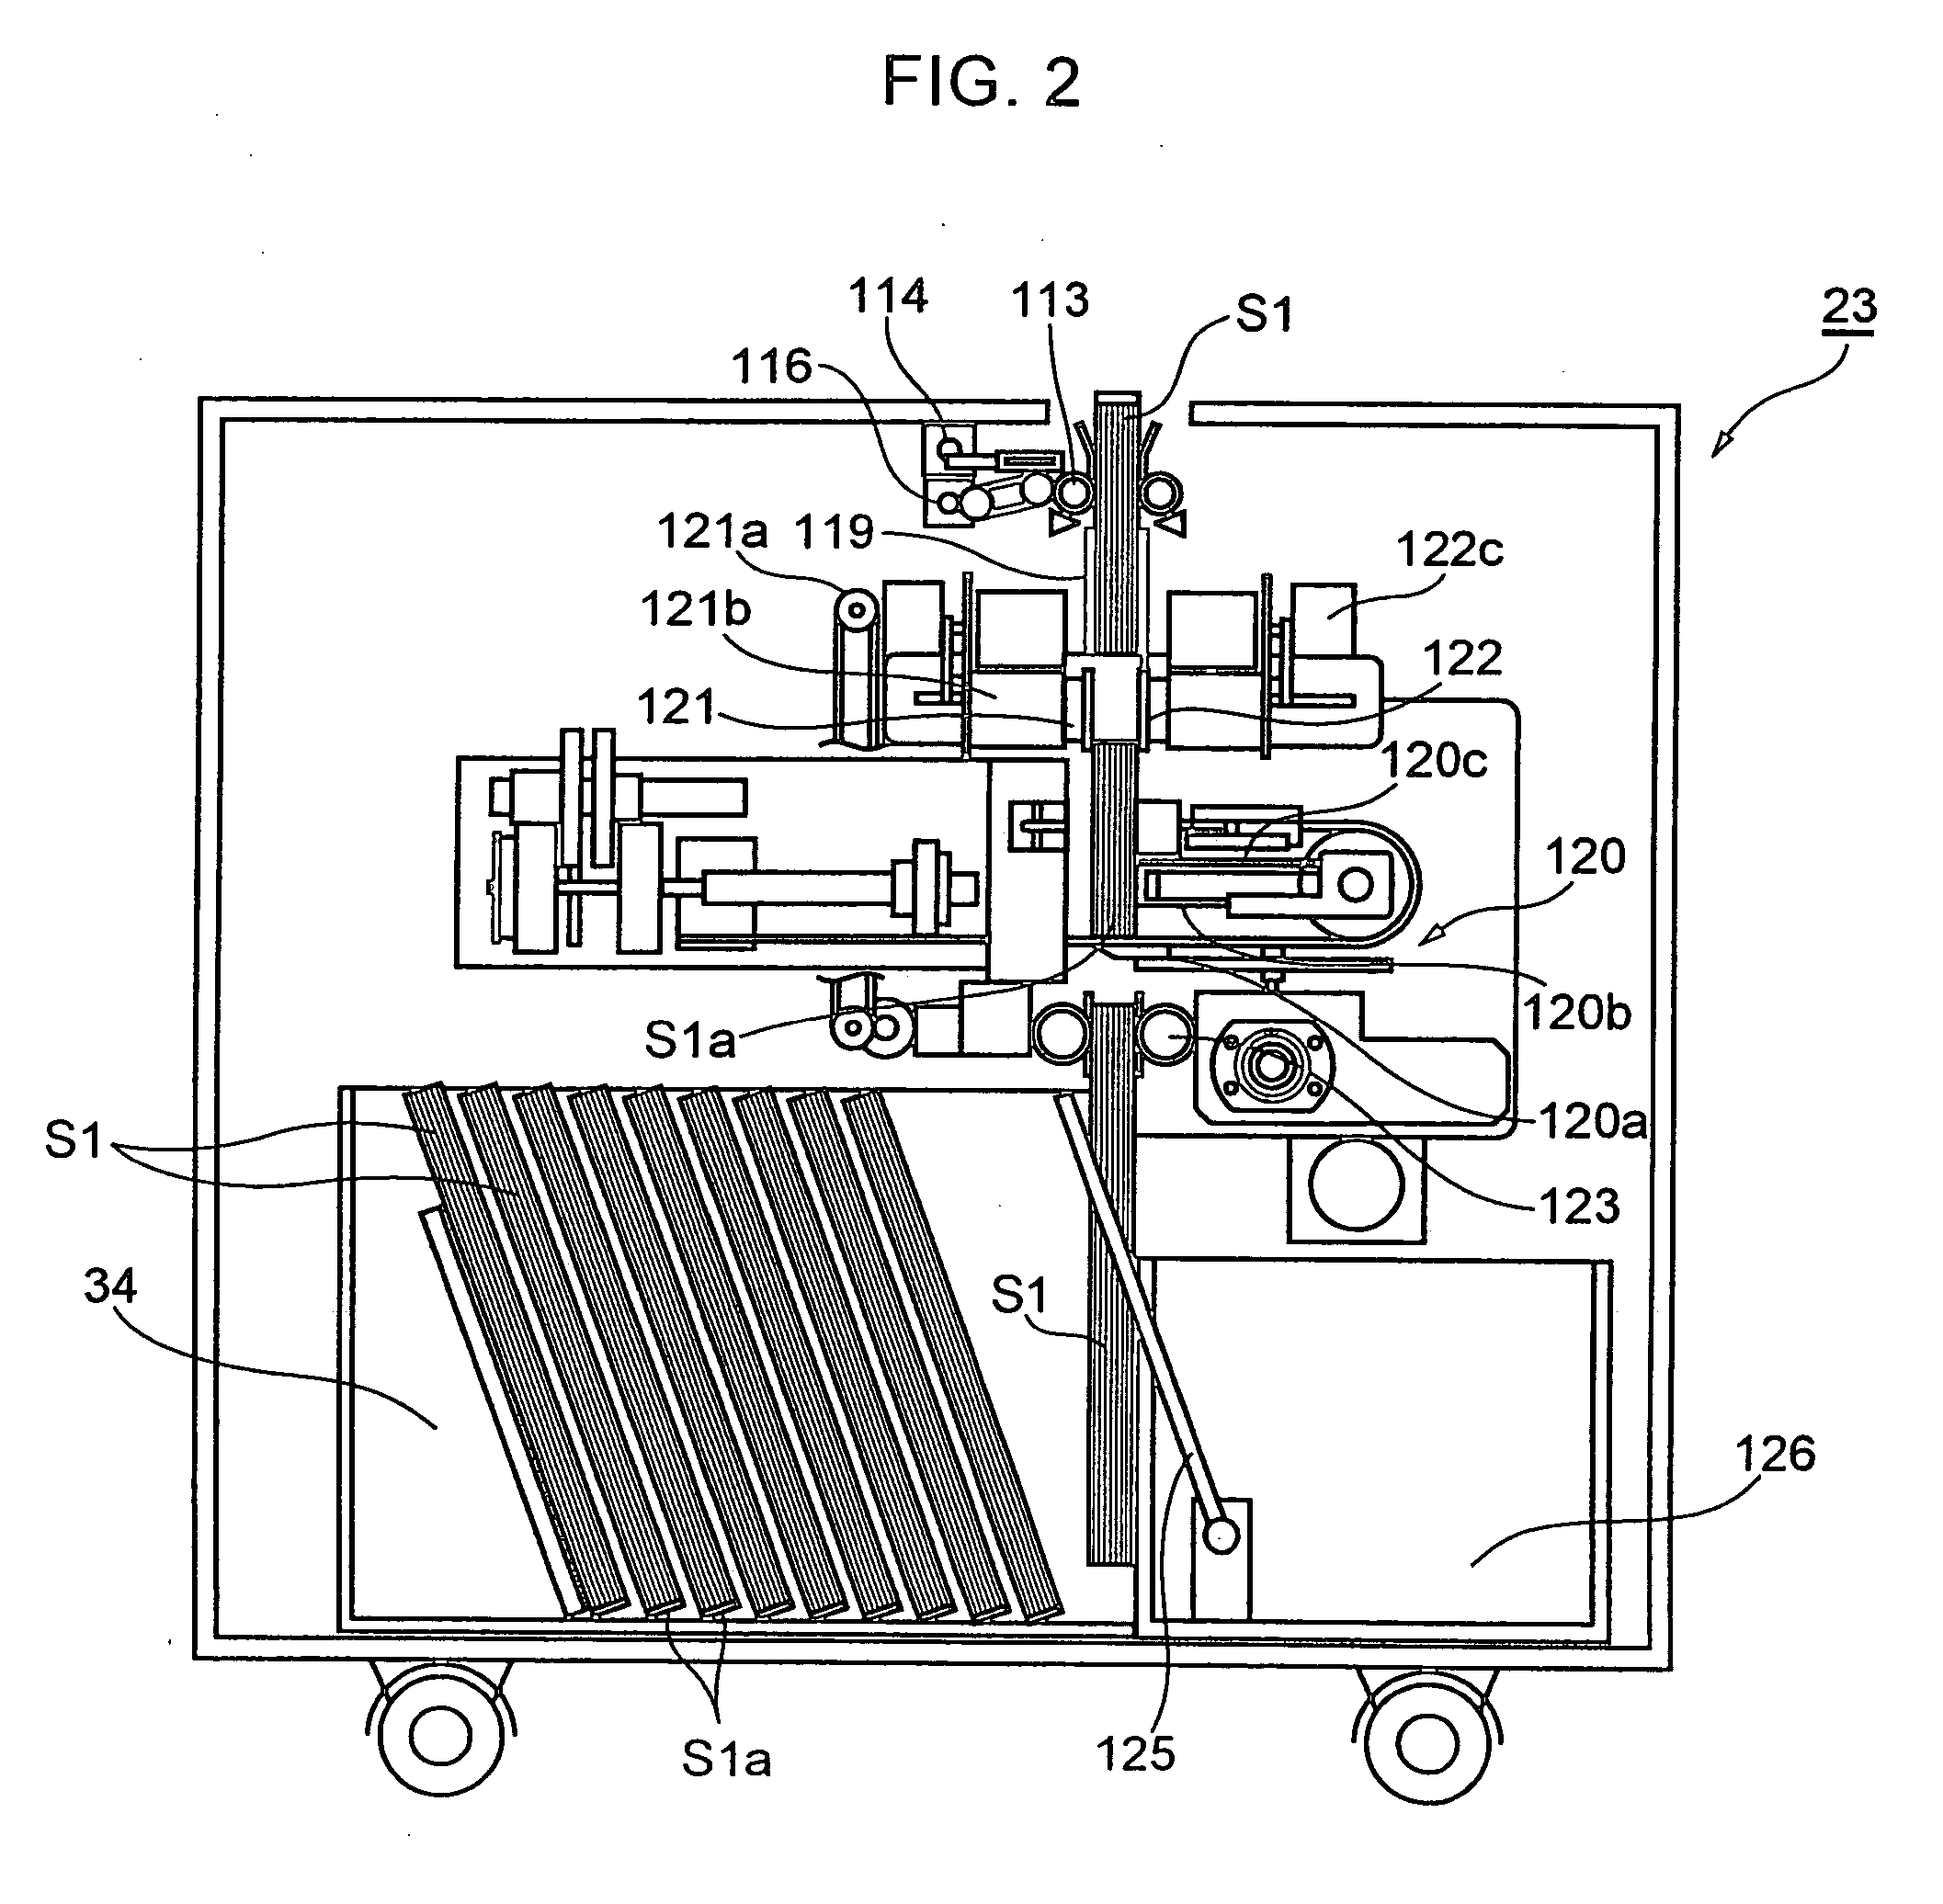 Image formation processing system